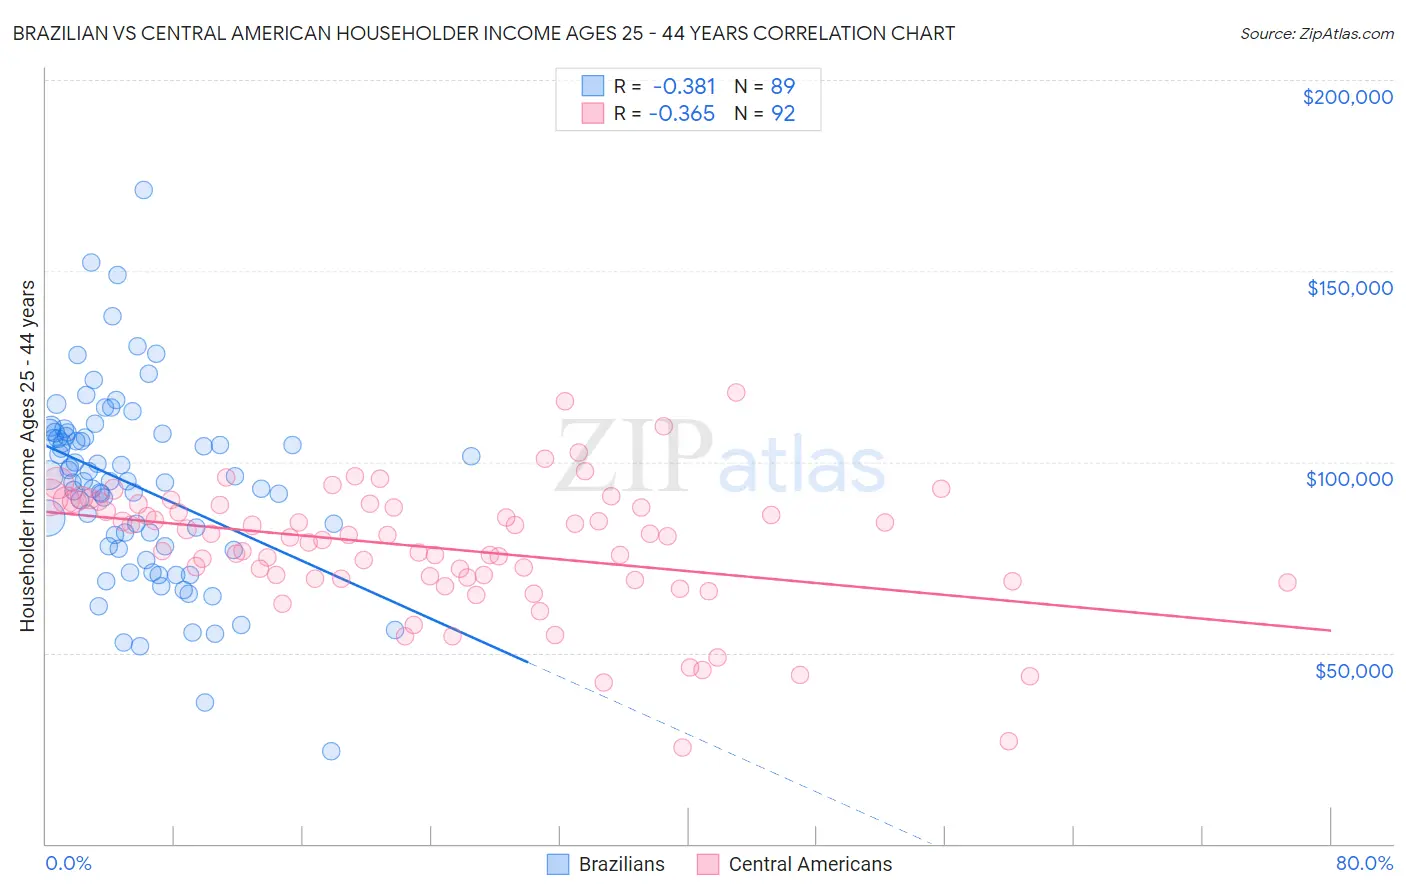 Brazilian vs Central American Householder Income Ages 25 - 44 years